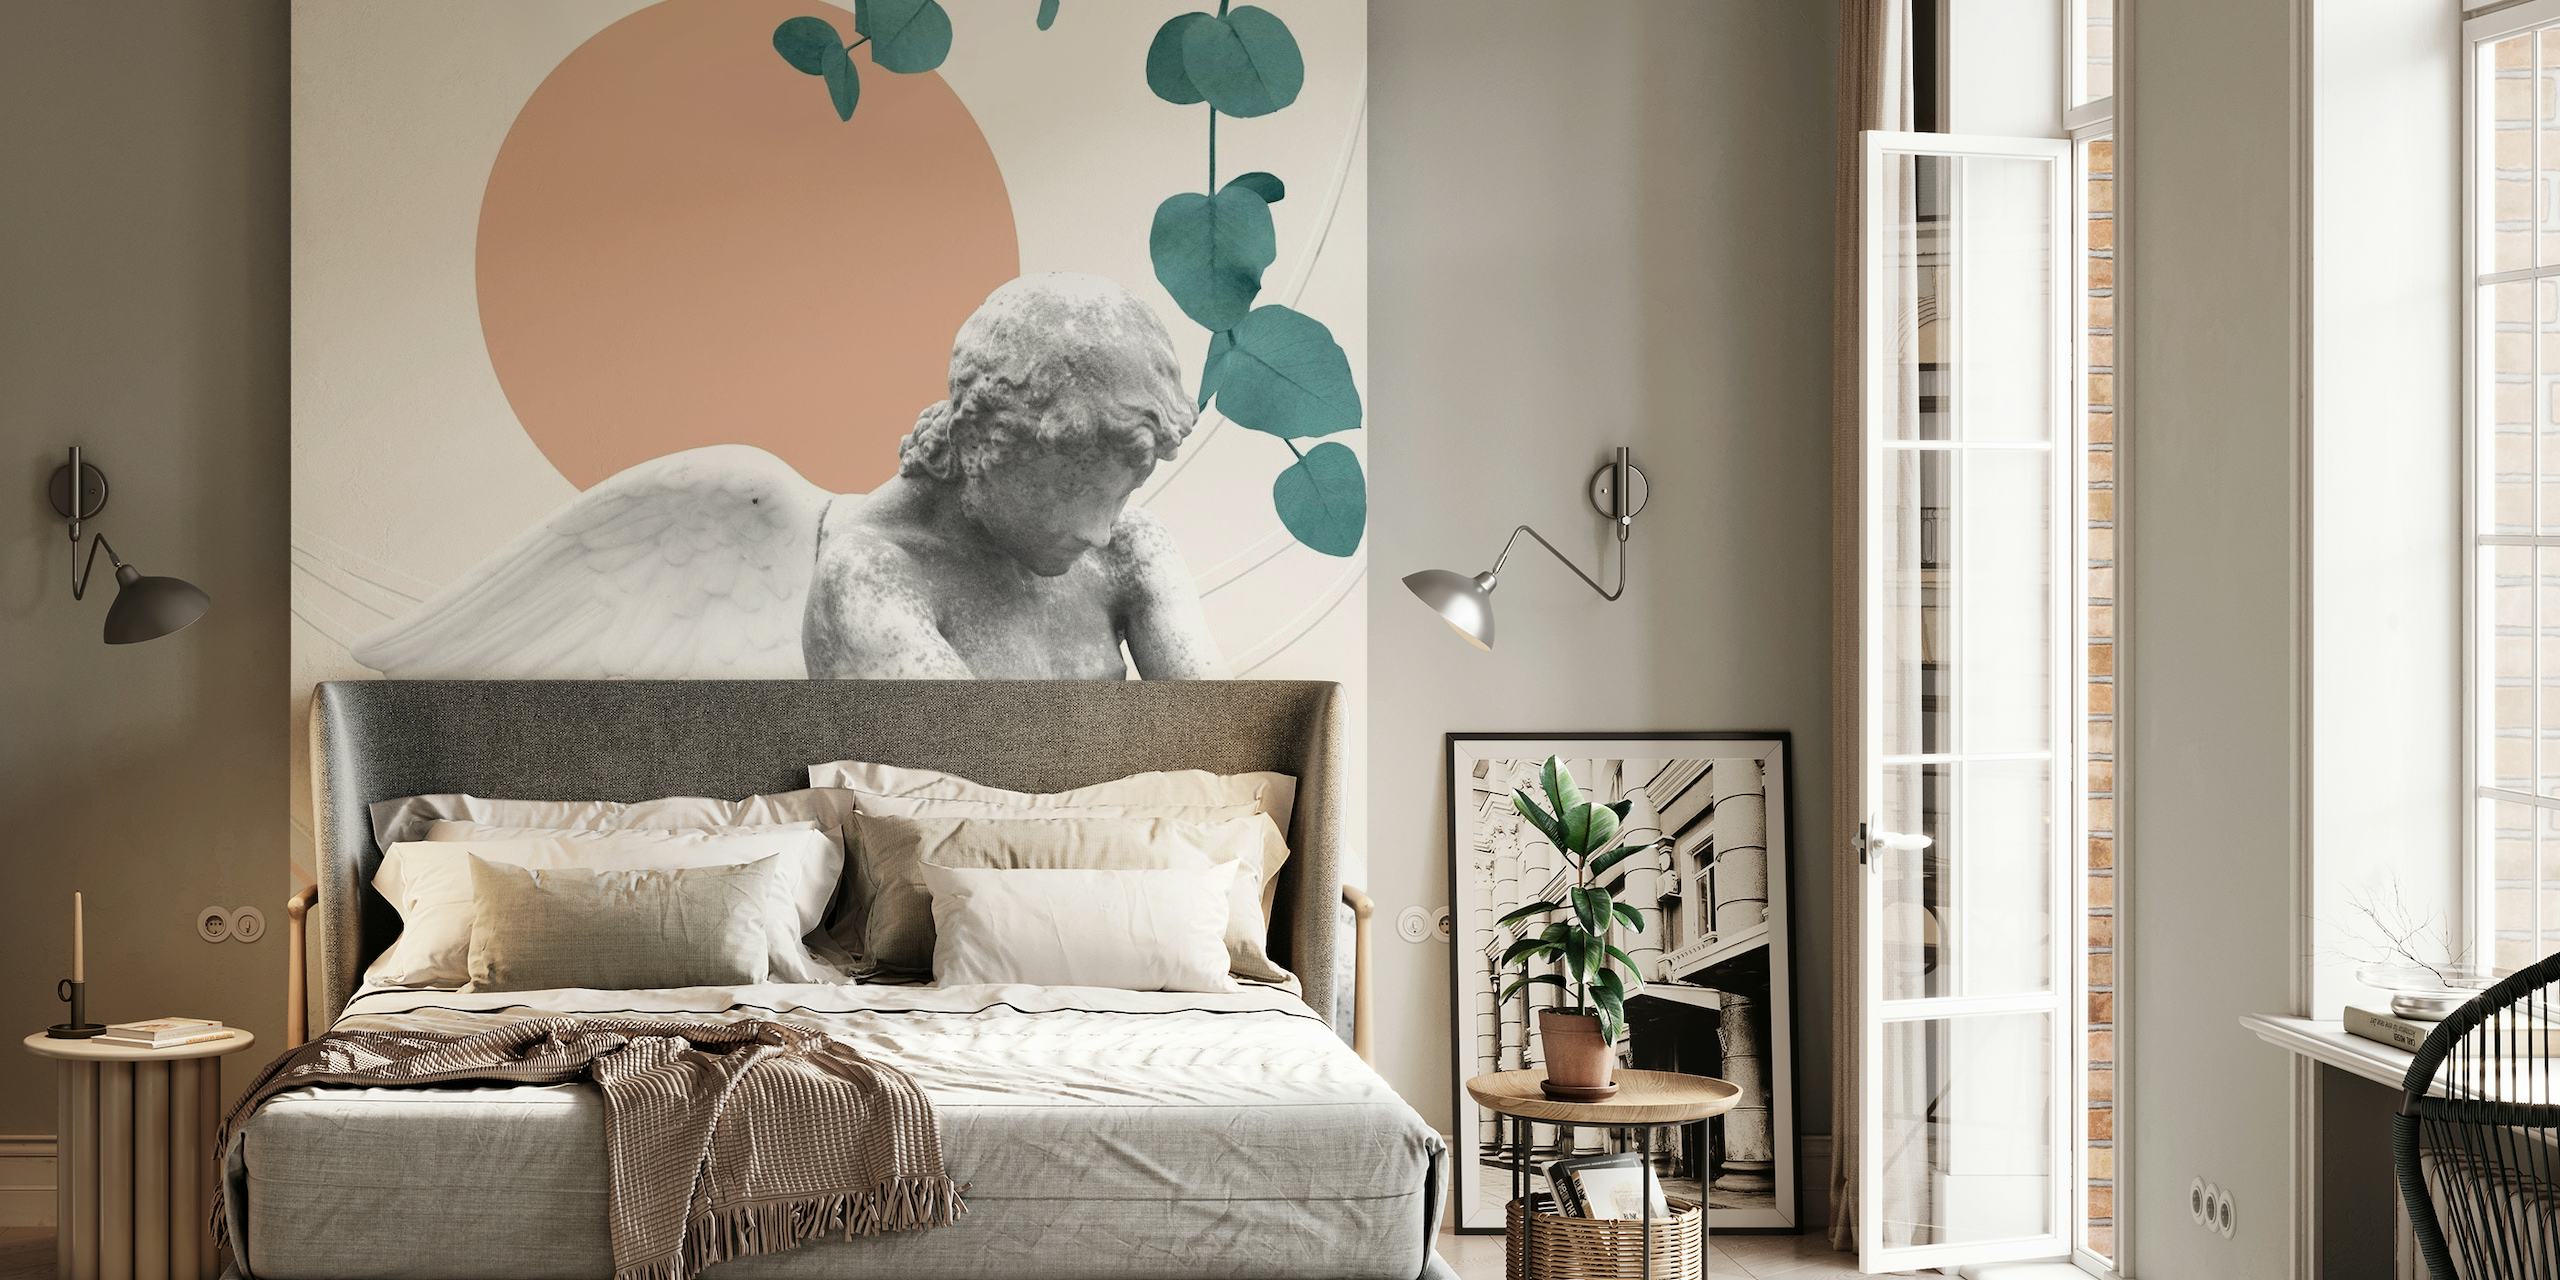 Eros Abstract Finesse wall mural with cherub, marble textures, geometric shapes, and botanical elements.